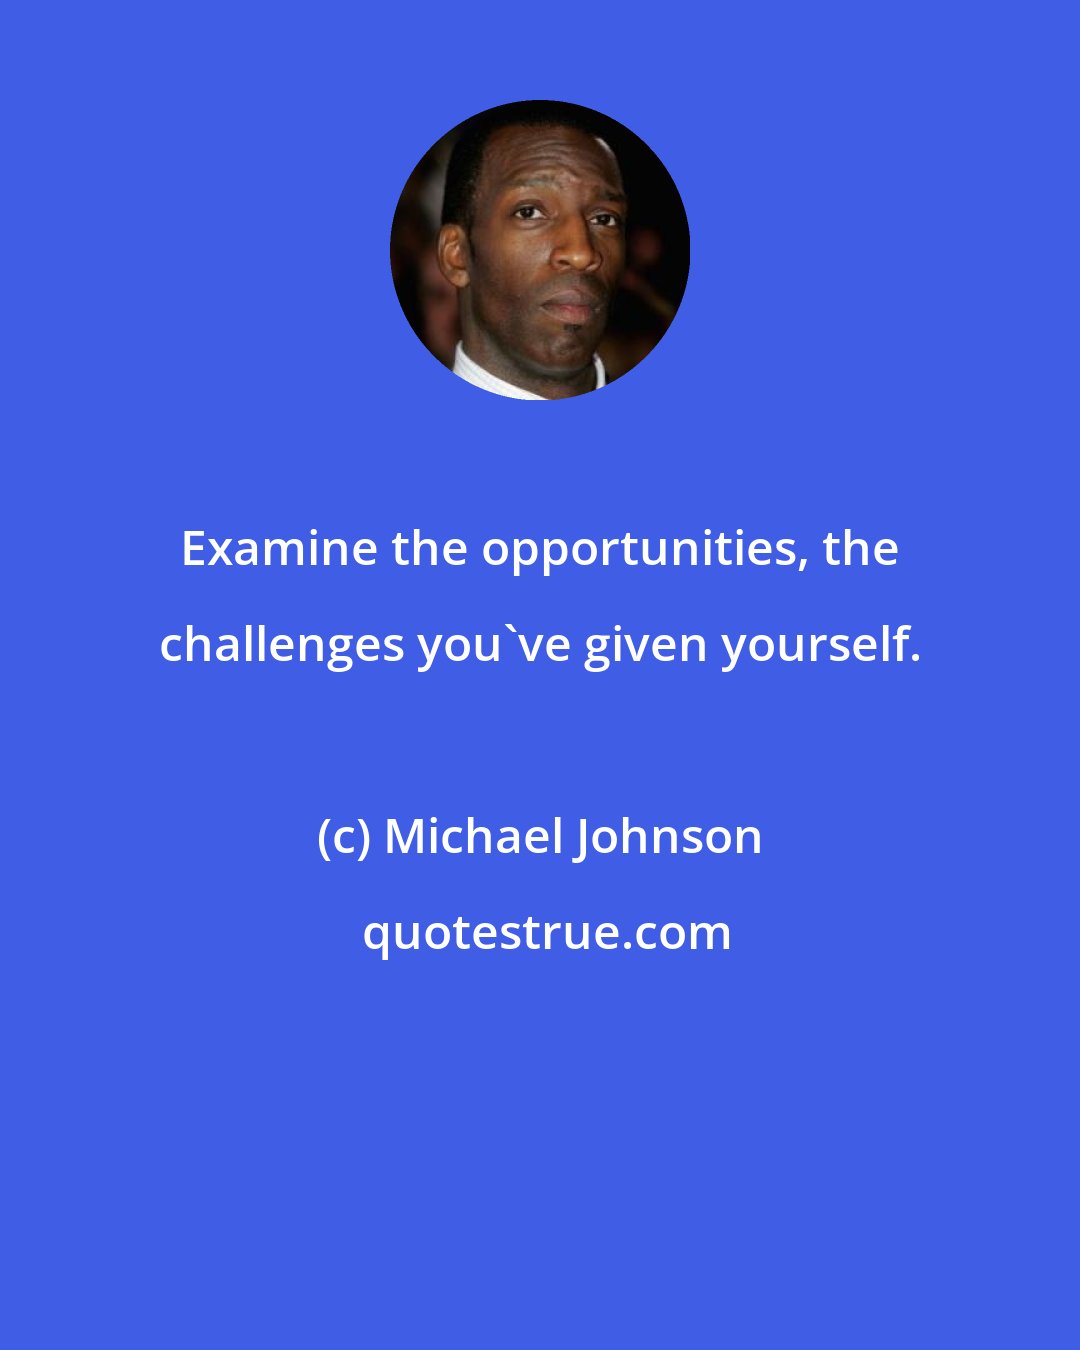 Michael Johnson: Examine the opportunities, the challenges you've given yourself.